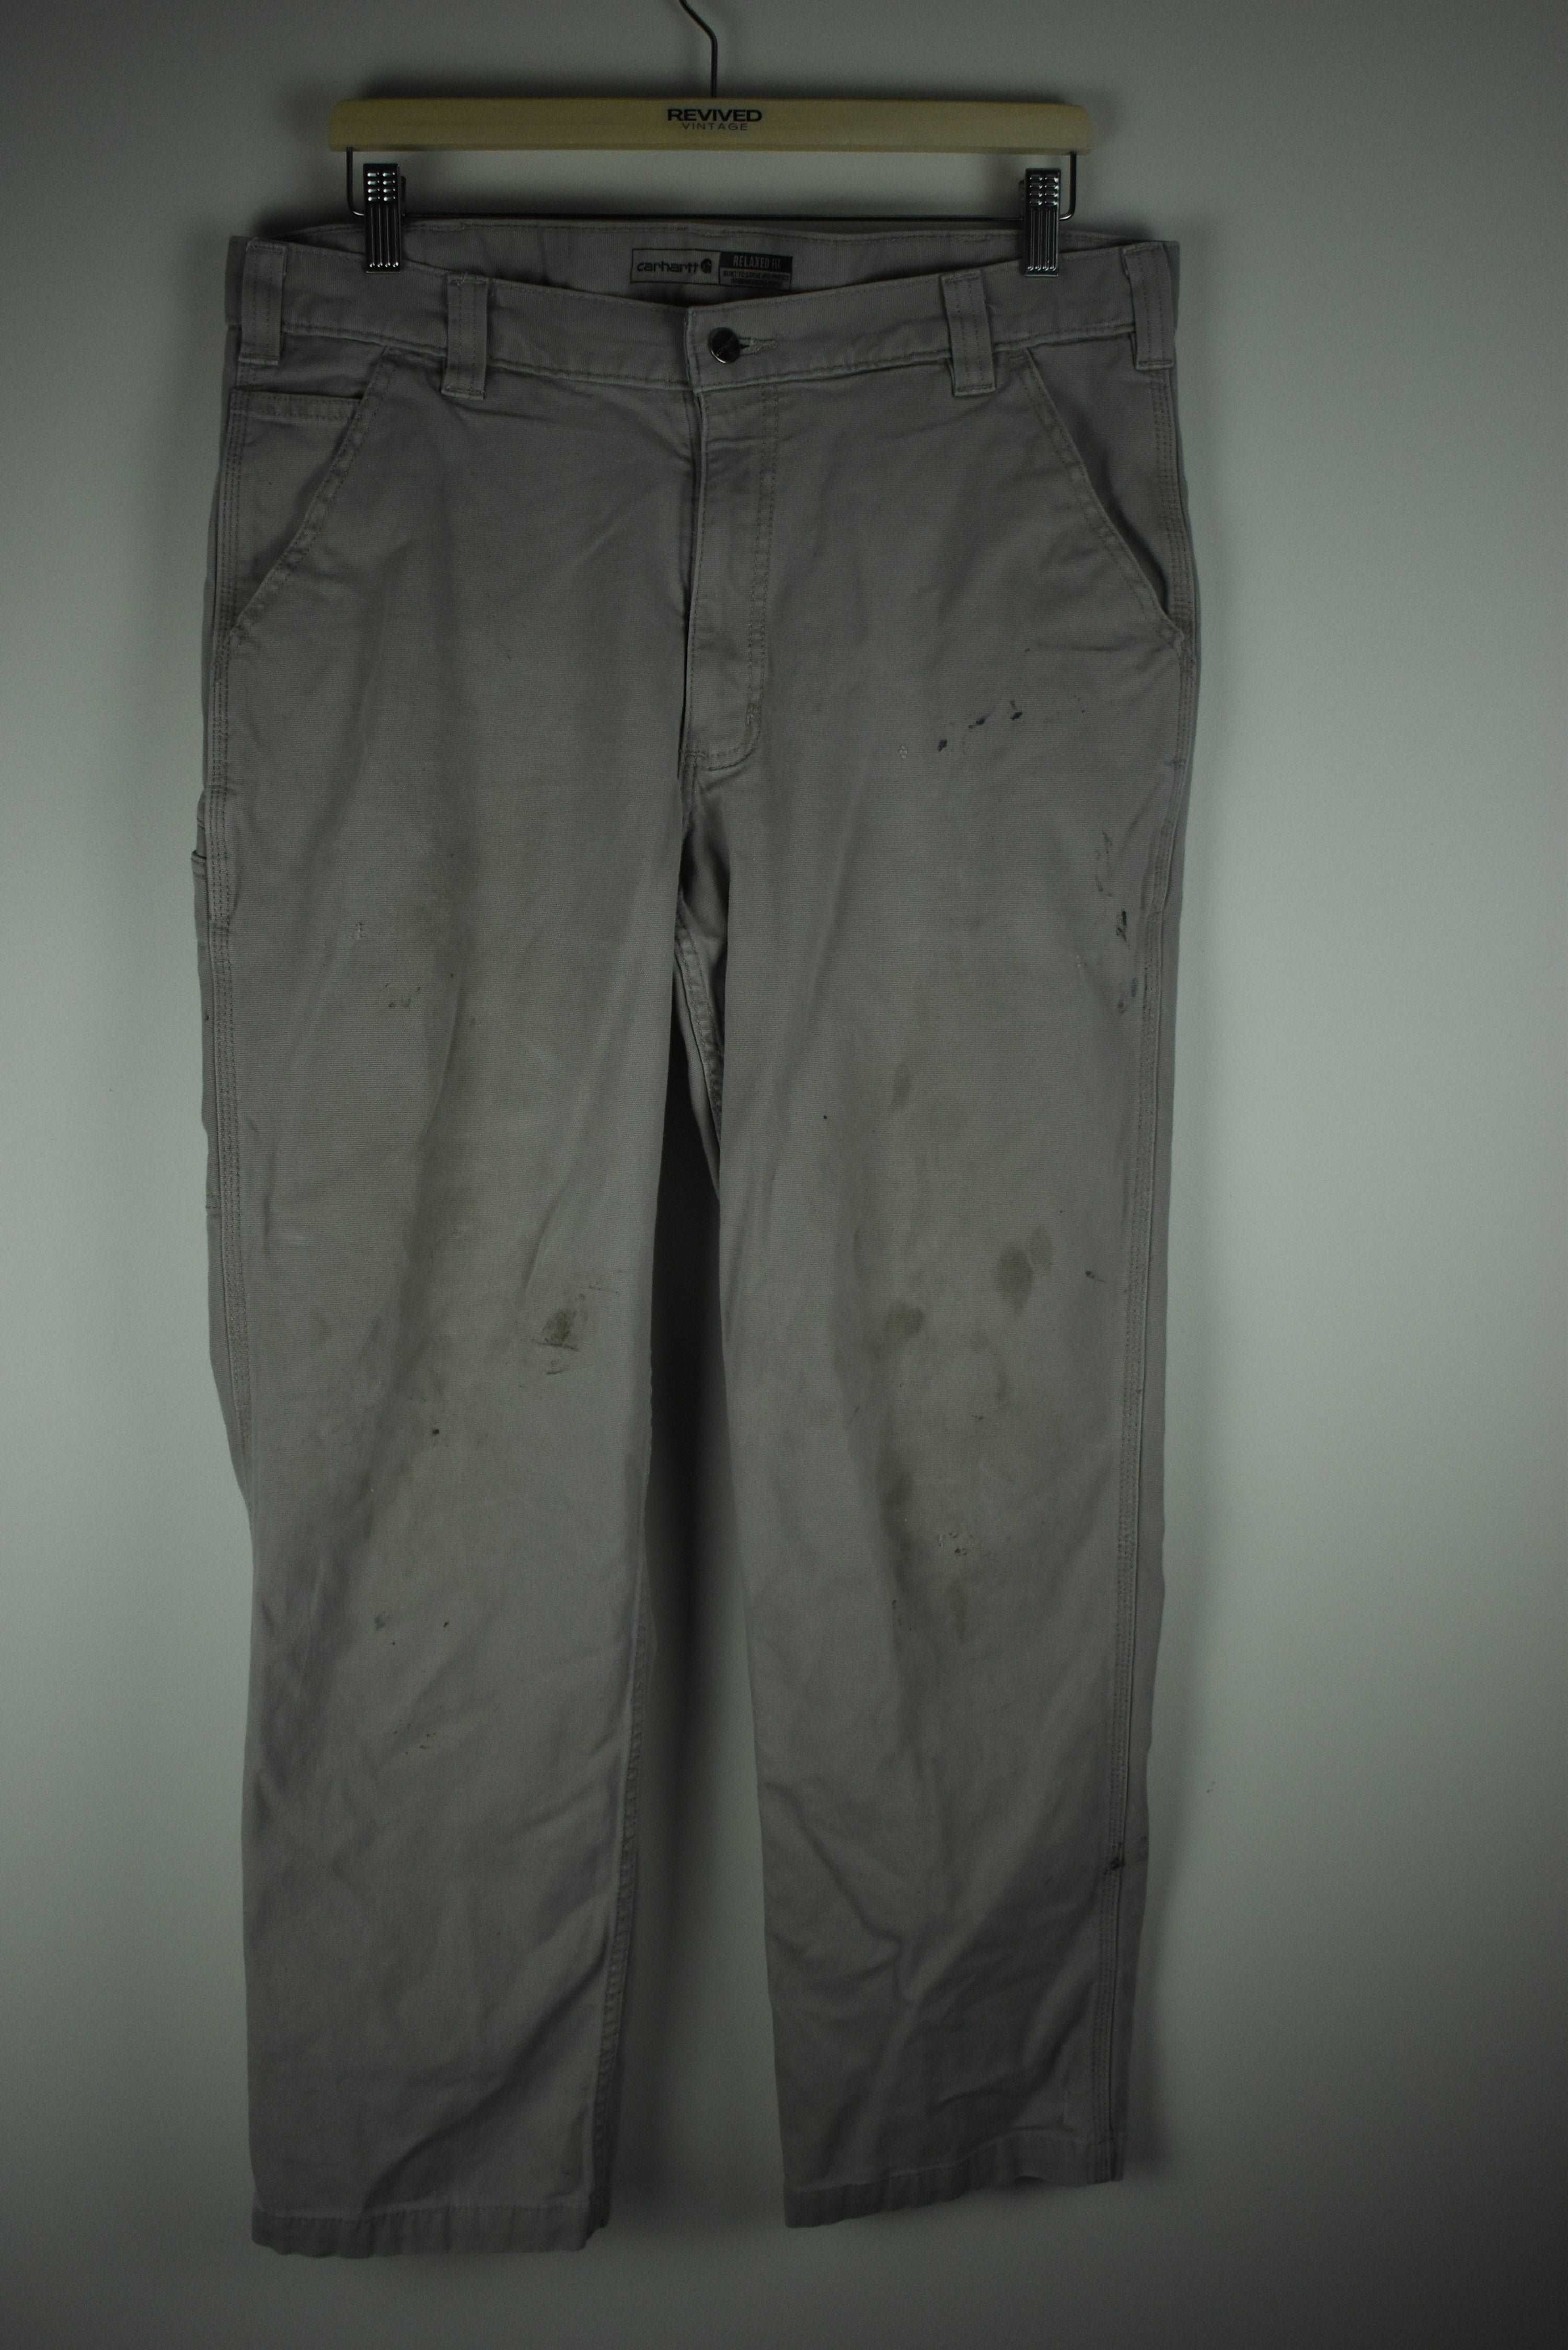 Vintage Carhartt Classic Workpants Relaxed Fit 36 x 30